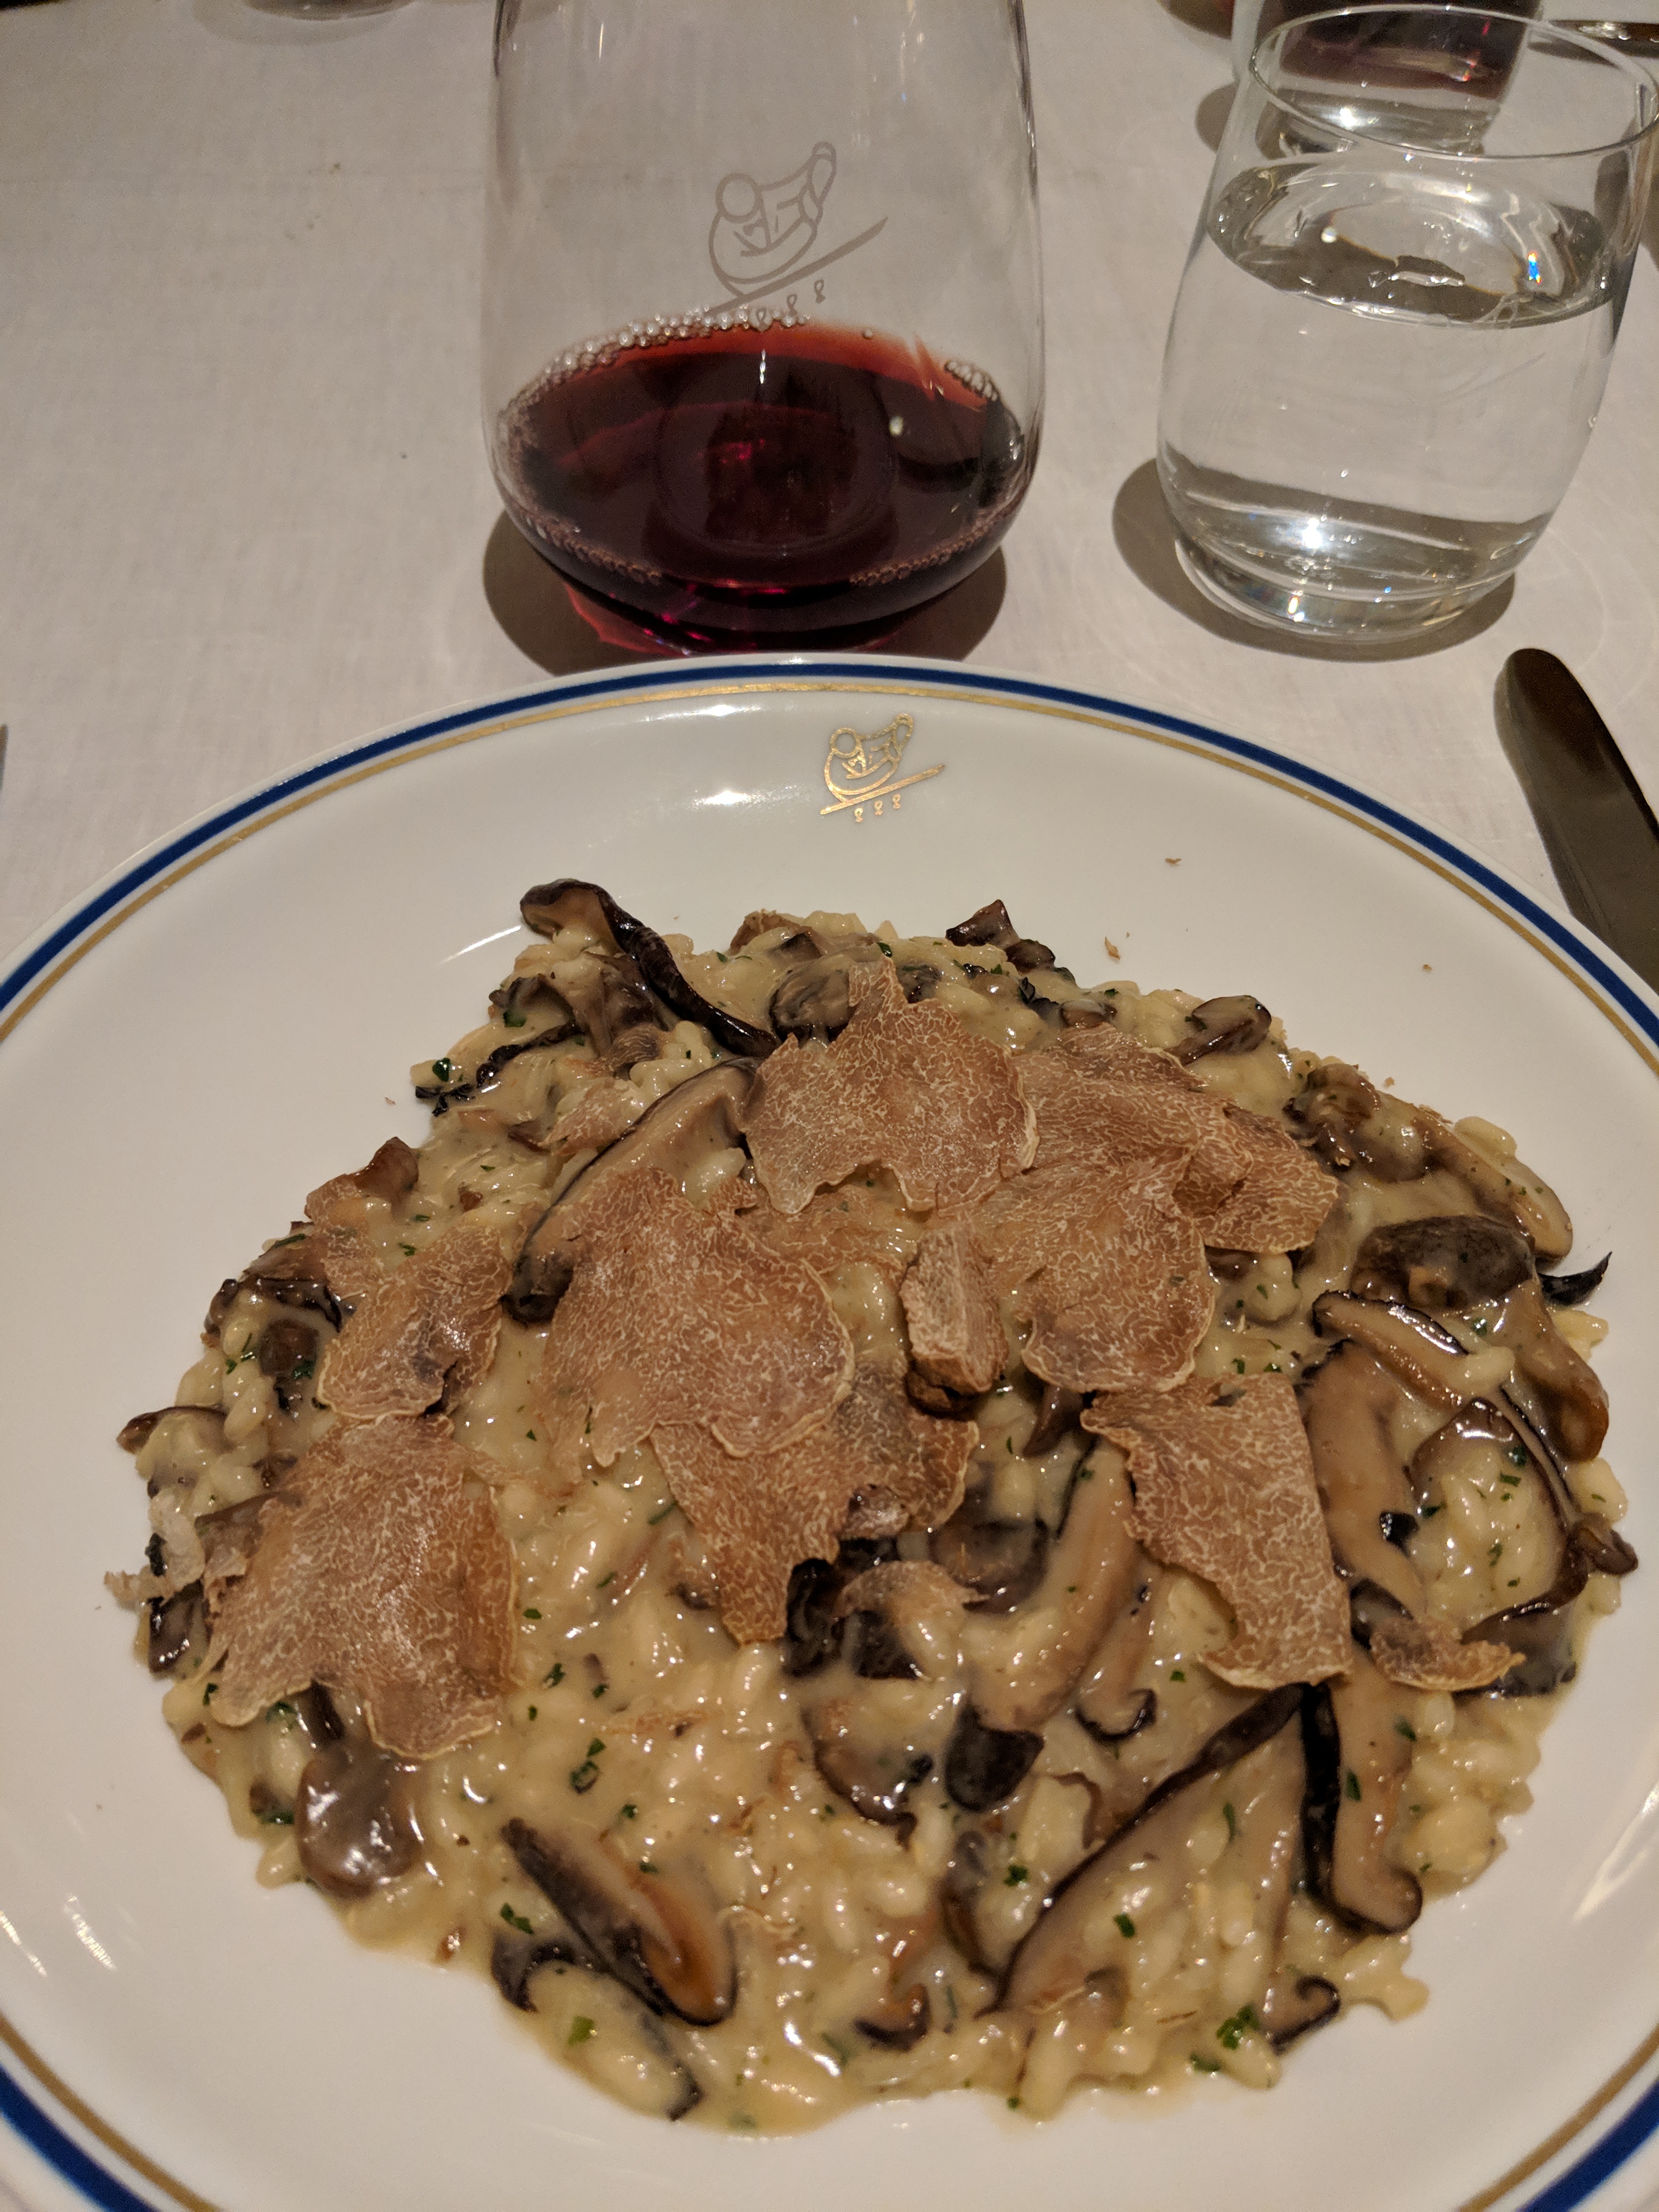 Risotto with Mushrooms and White Truffle from Alba